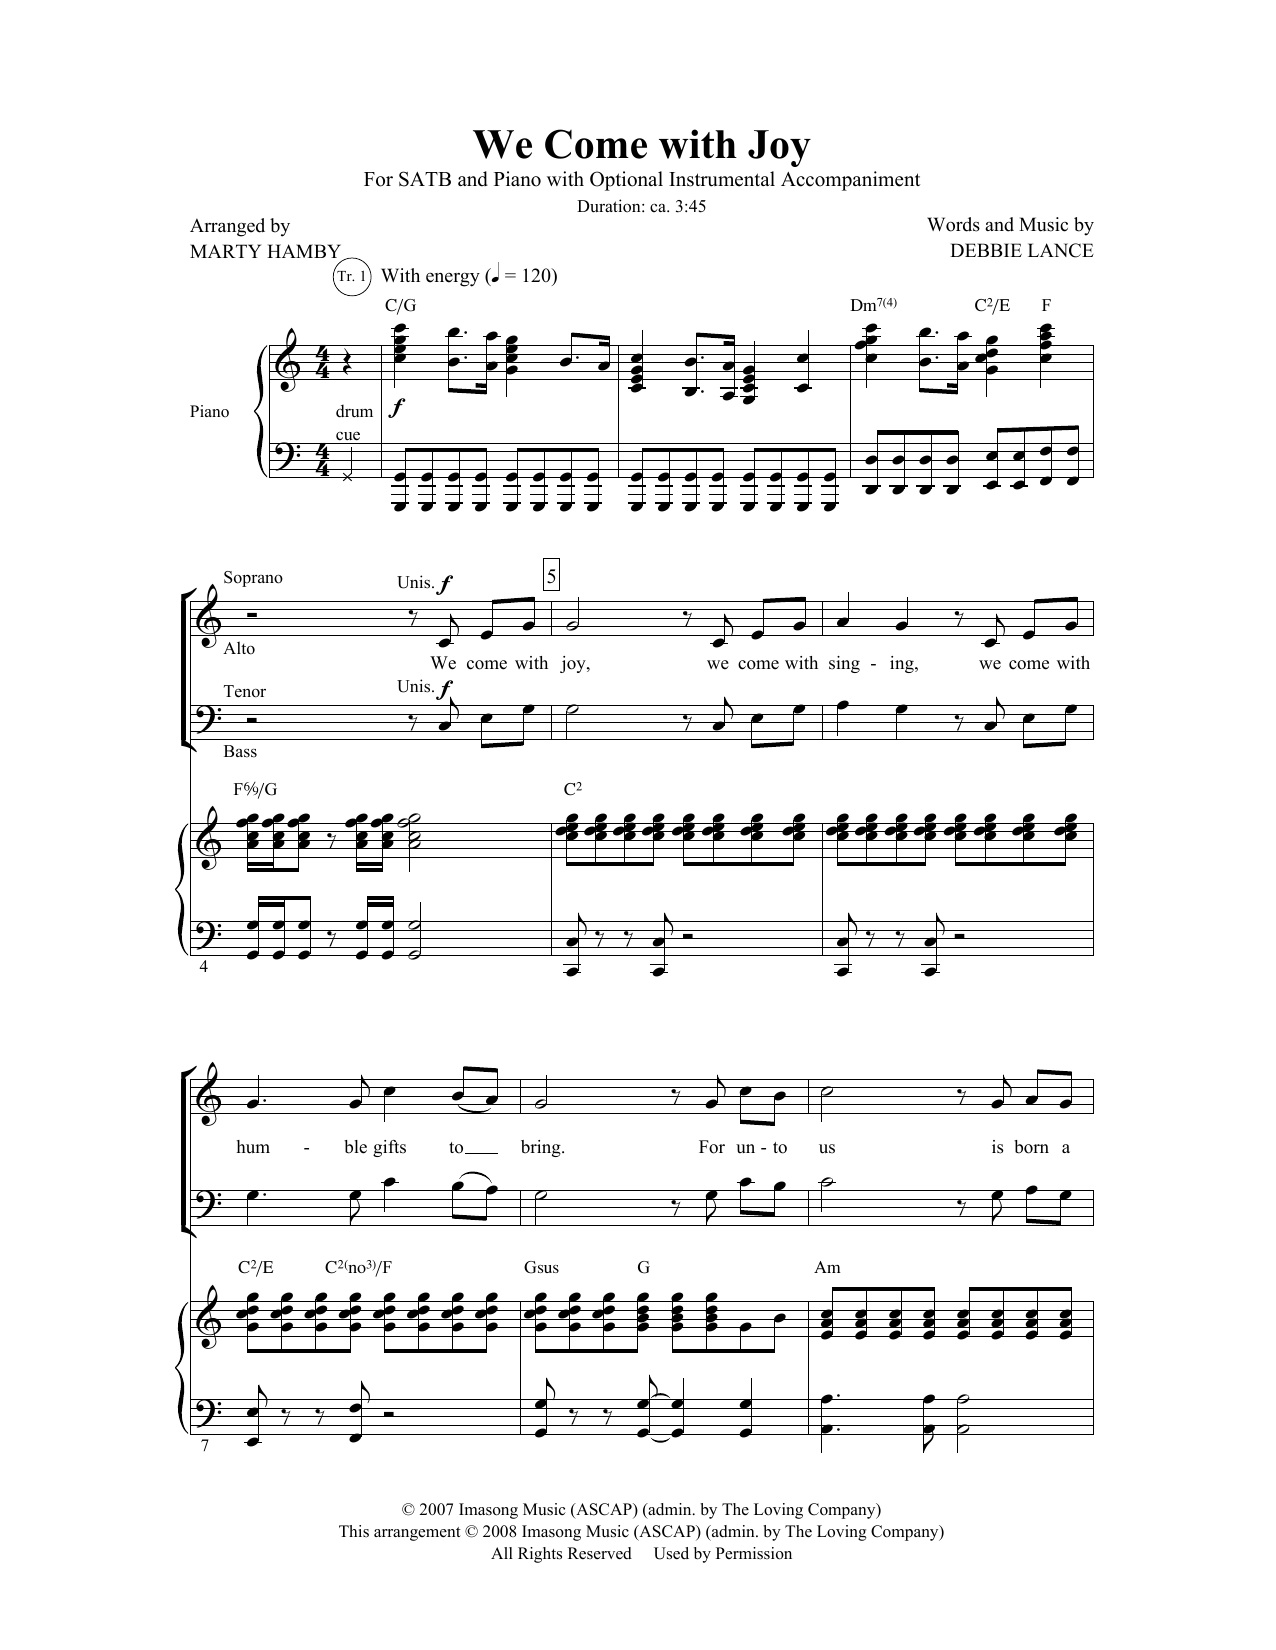 Download Debbie Lance We Come With Joy (arr. Marty Hamby) Sheet Music